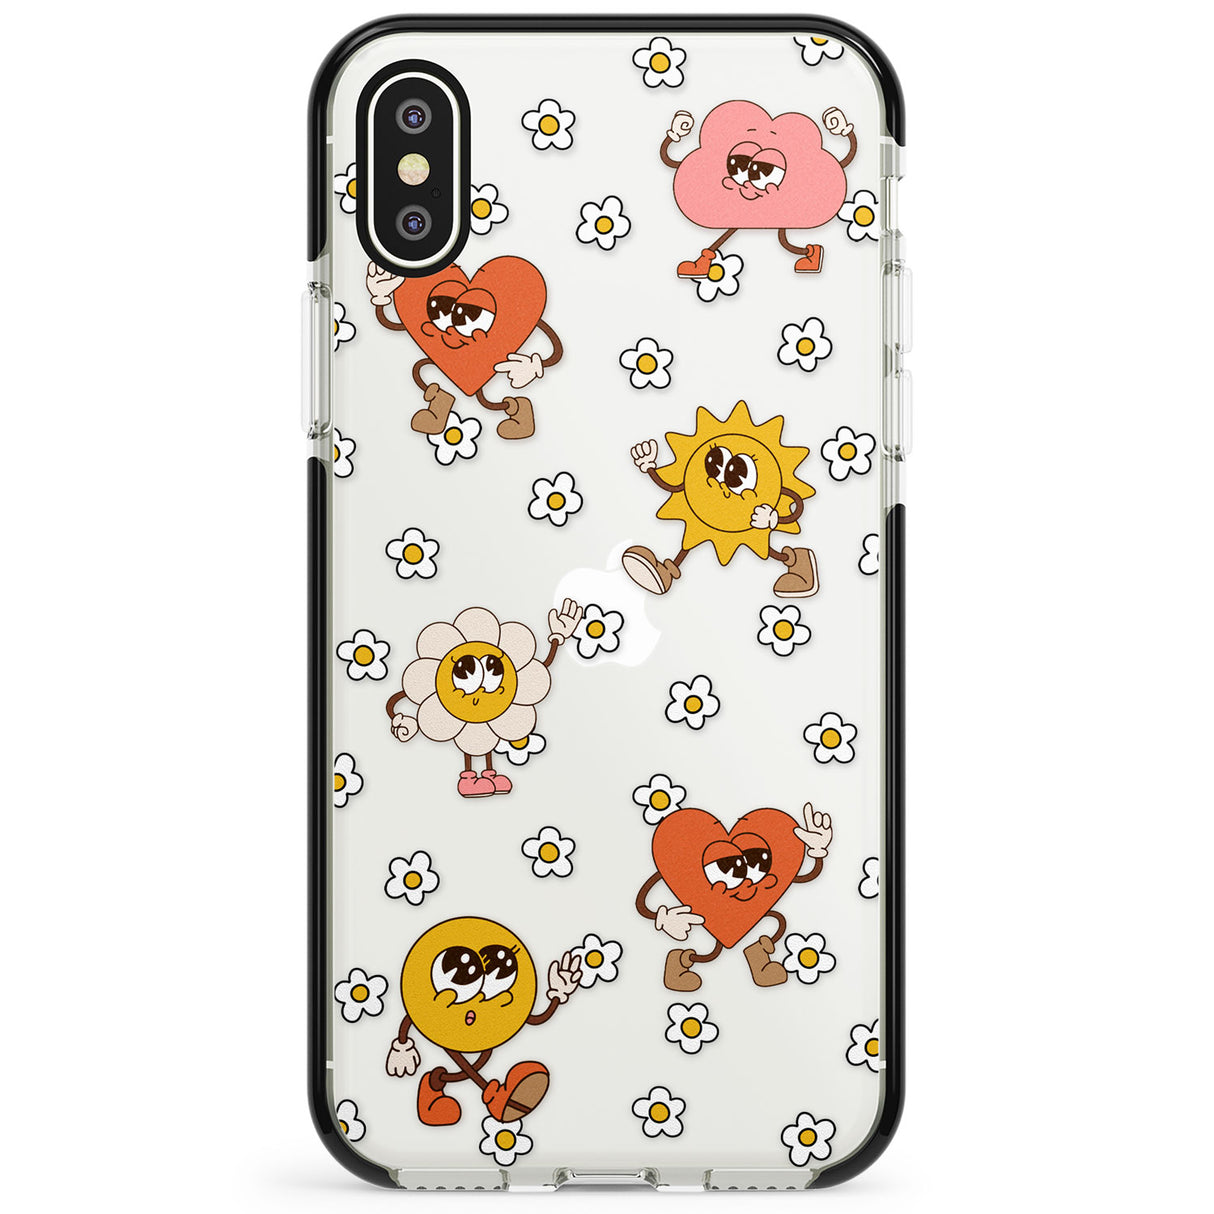 Daisies & Friends Phone Case for iPhone X XS Max XR